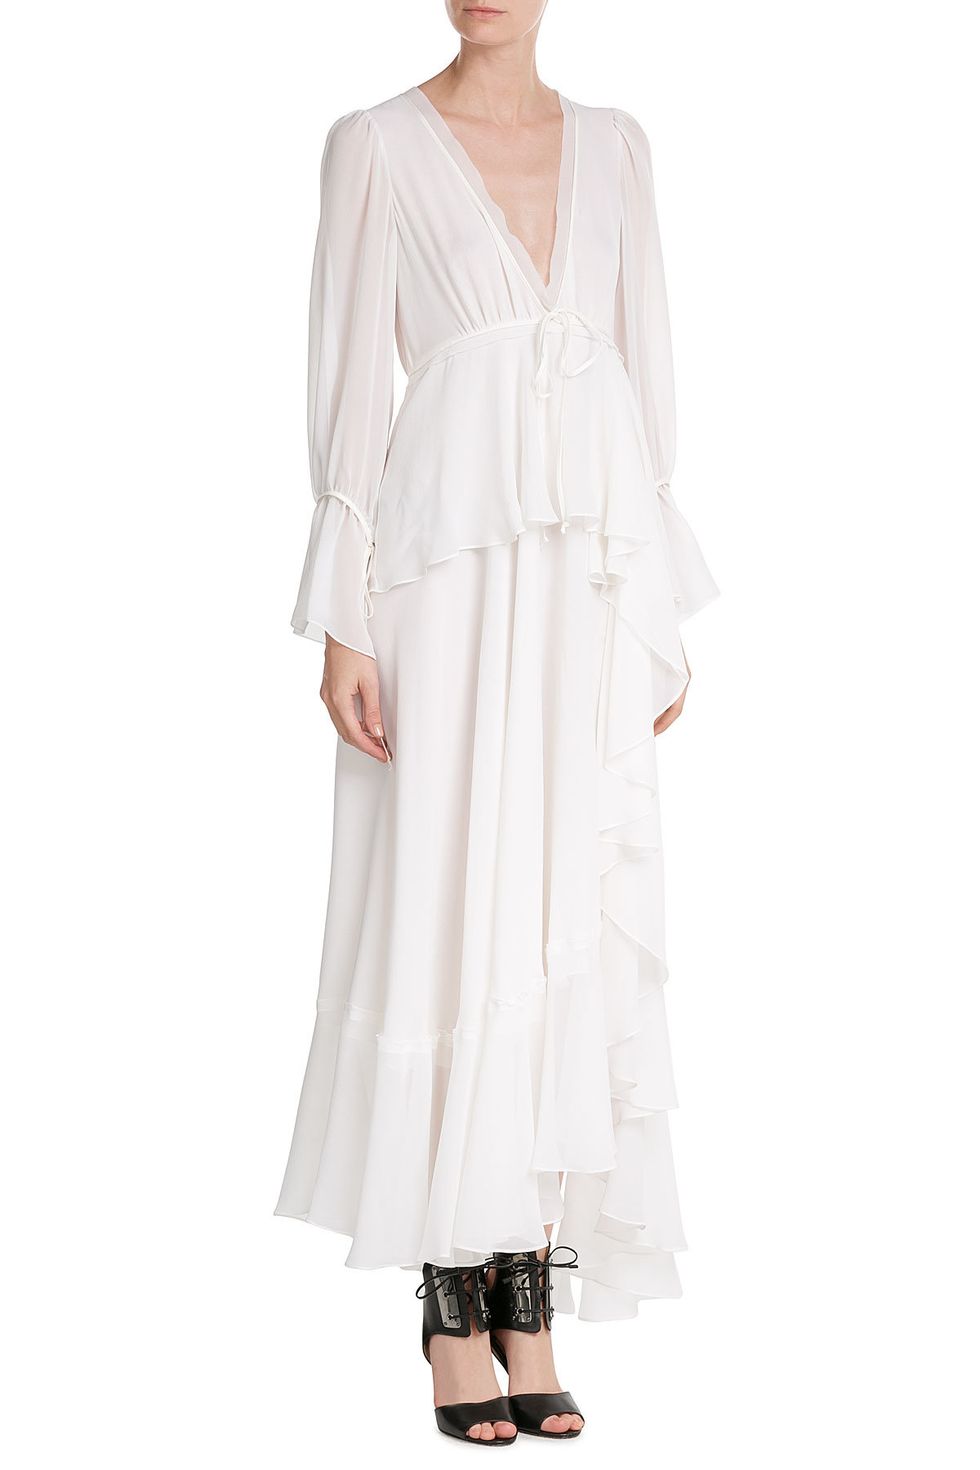 Clothing, Dress, White, Gown, Sleeve, Outerwear, Day dress, Robe, Neck, Shoulder, 